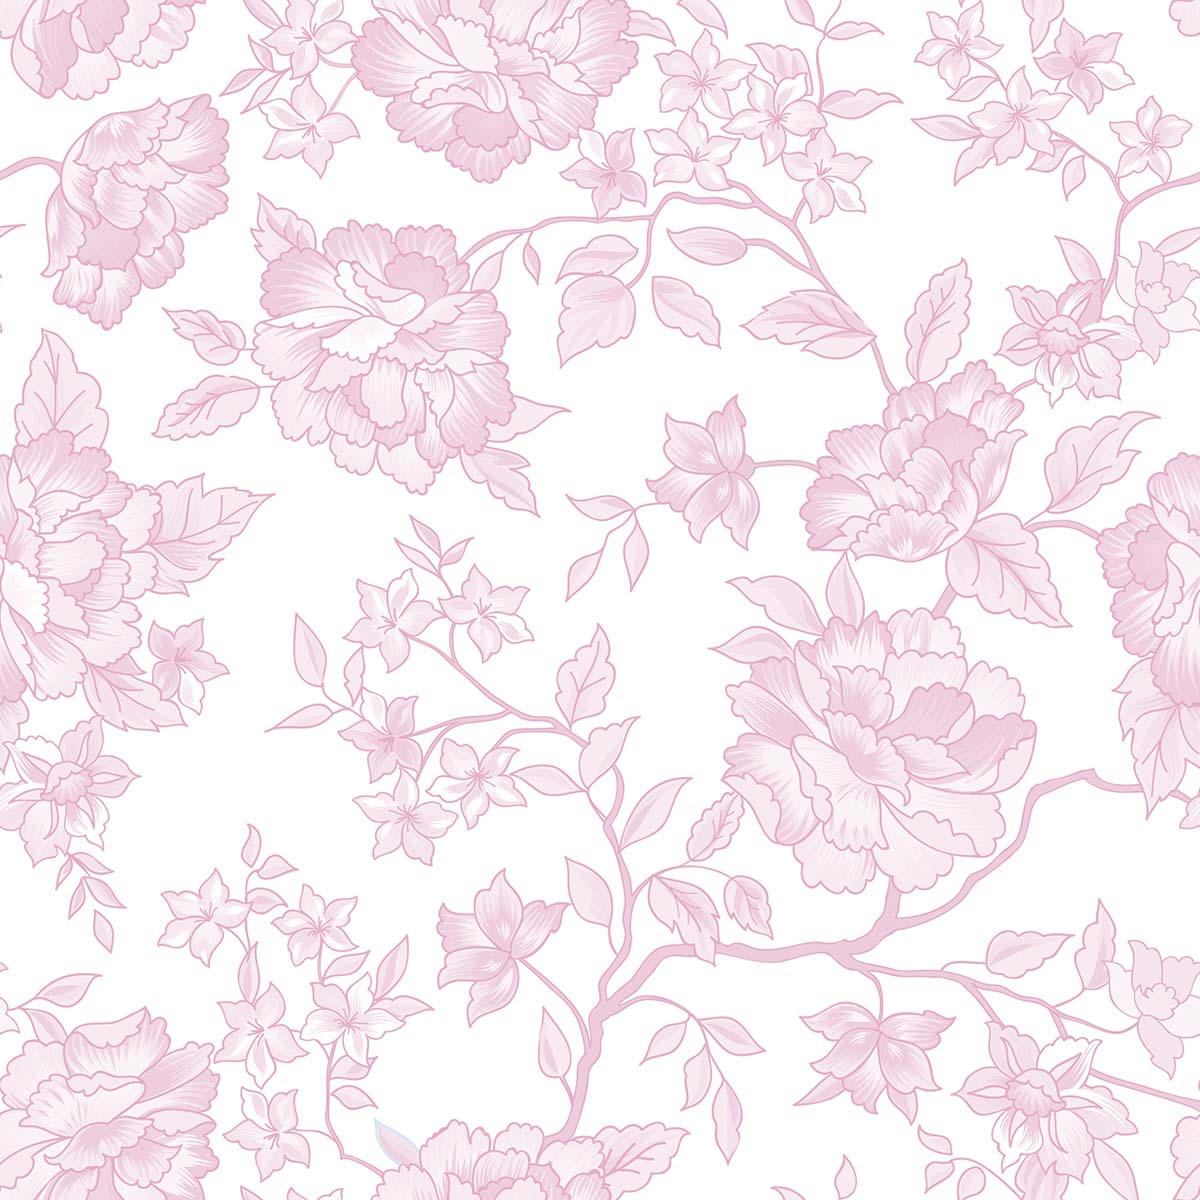 A pattern of flowers on a white background